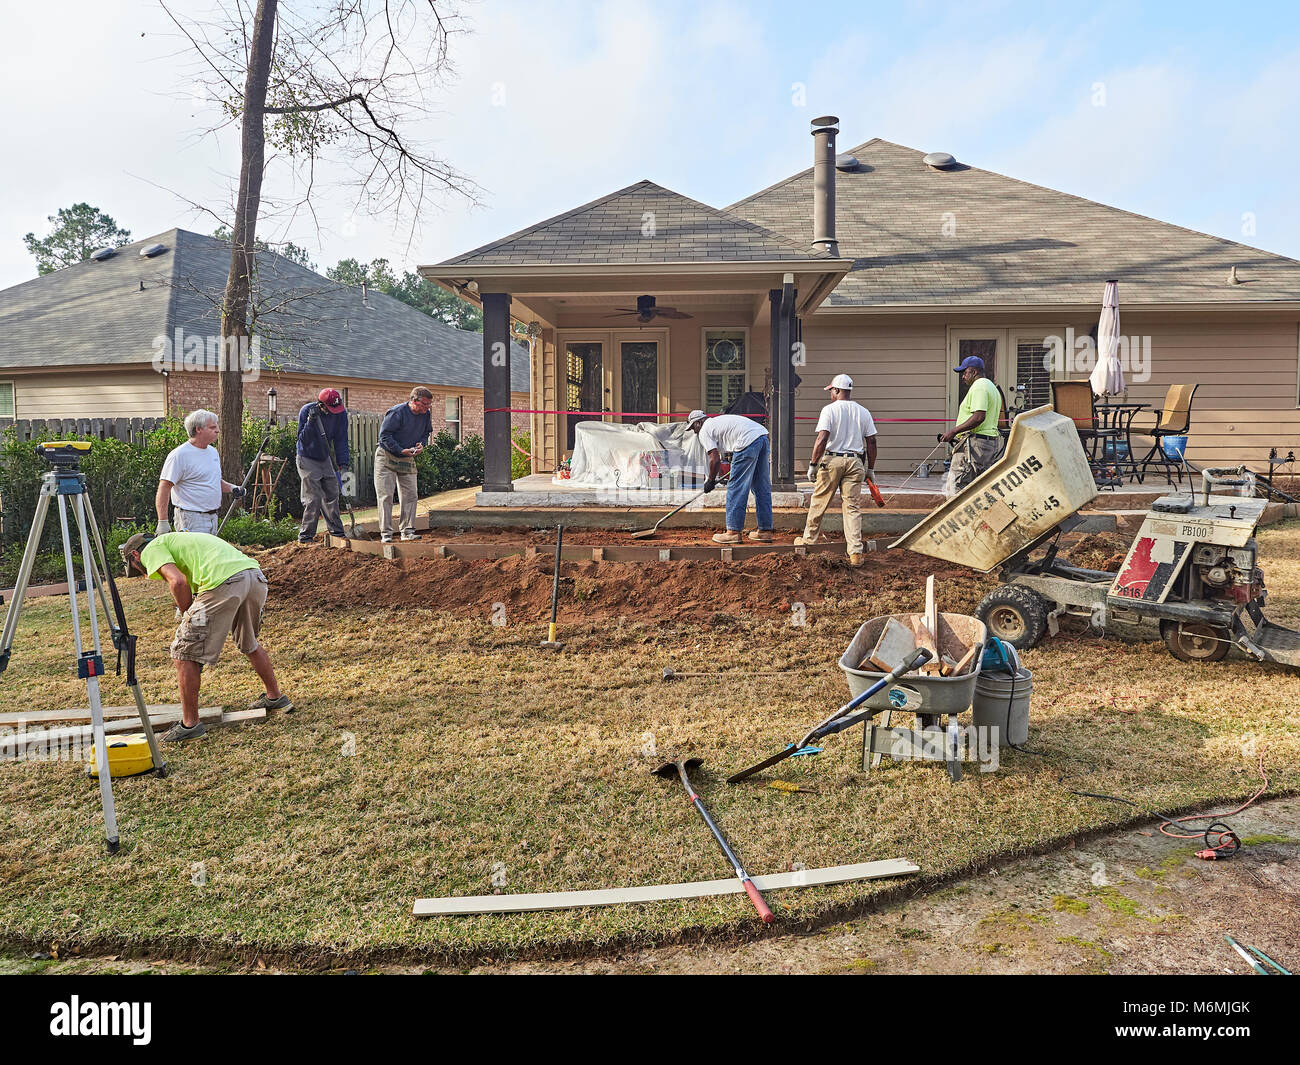 Construction workers at a residential site working on a patio for the home or house in Pike Road Alabama, USA. Stock Photo